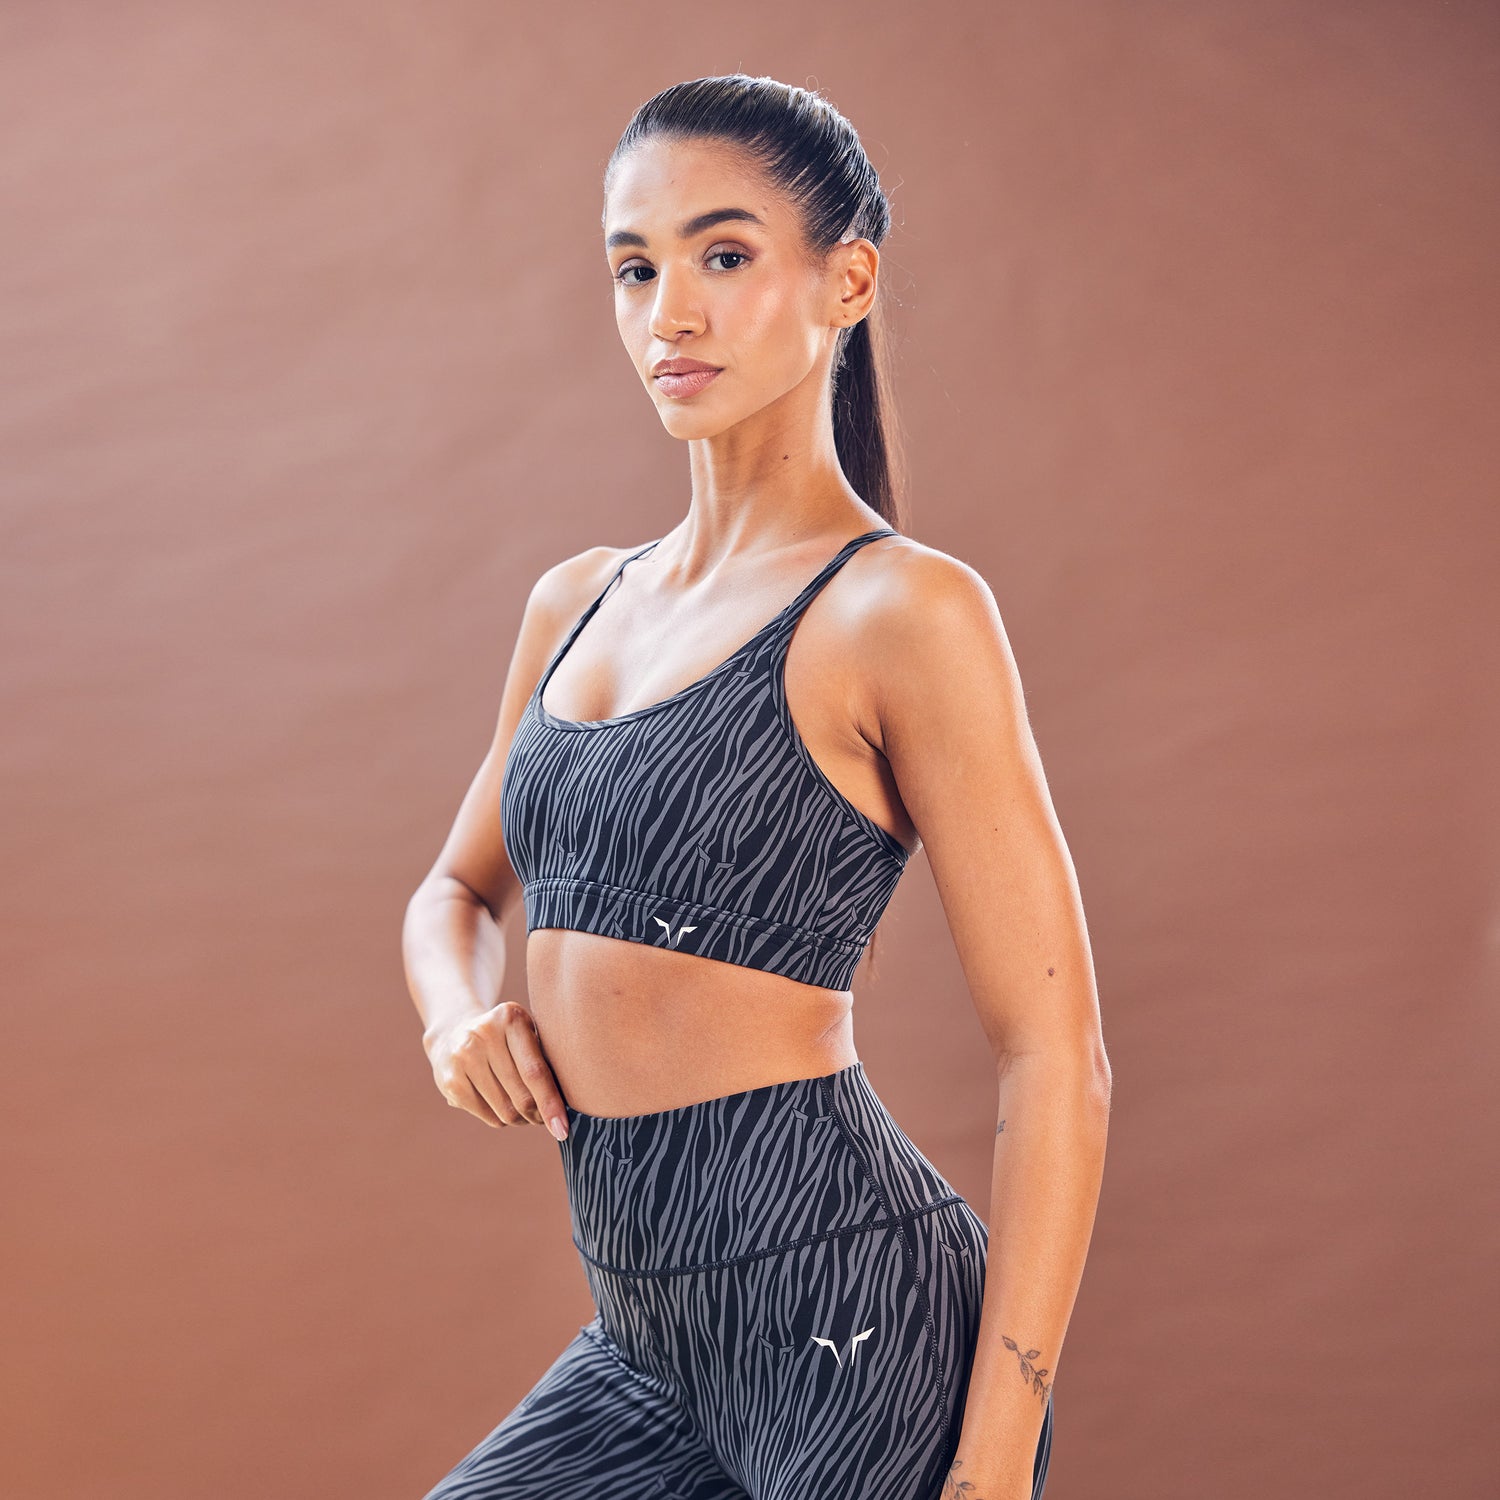 Basic sports bra - Strappy tops - T-shirts - CLOTHING - Woman 